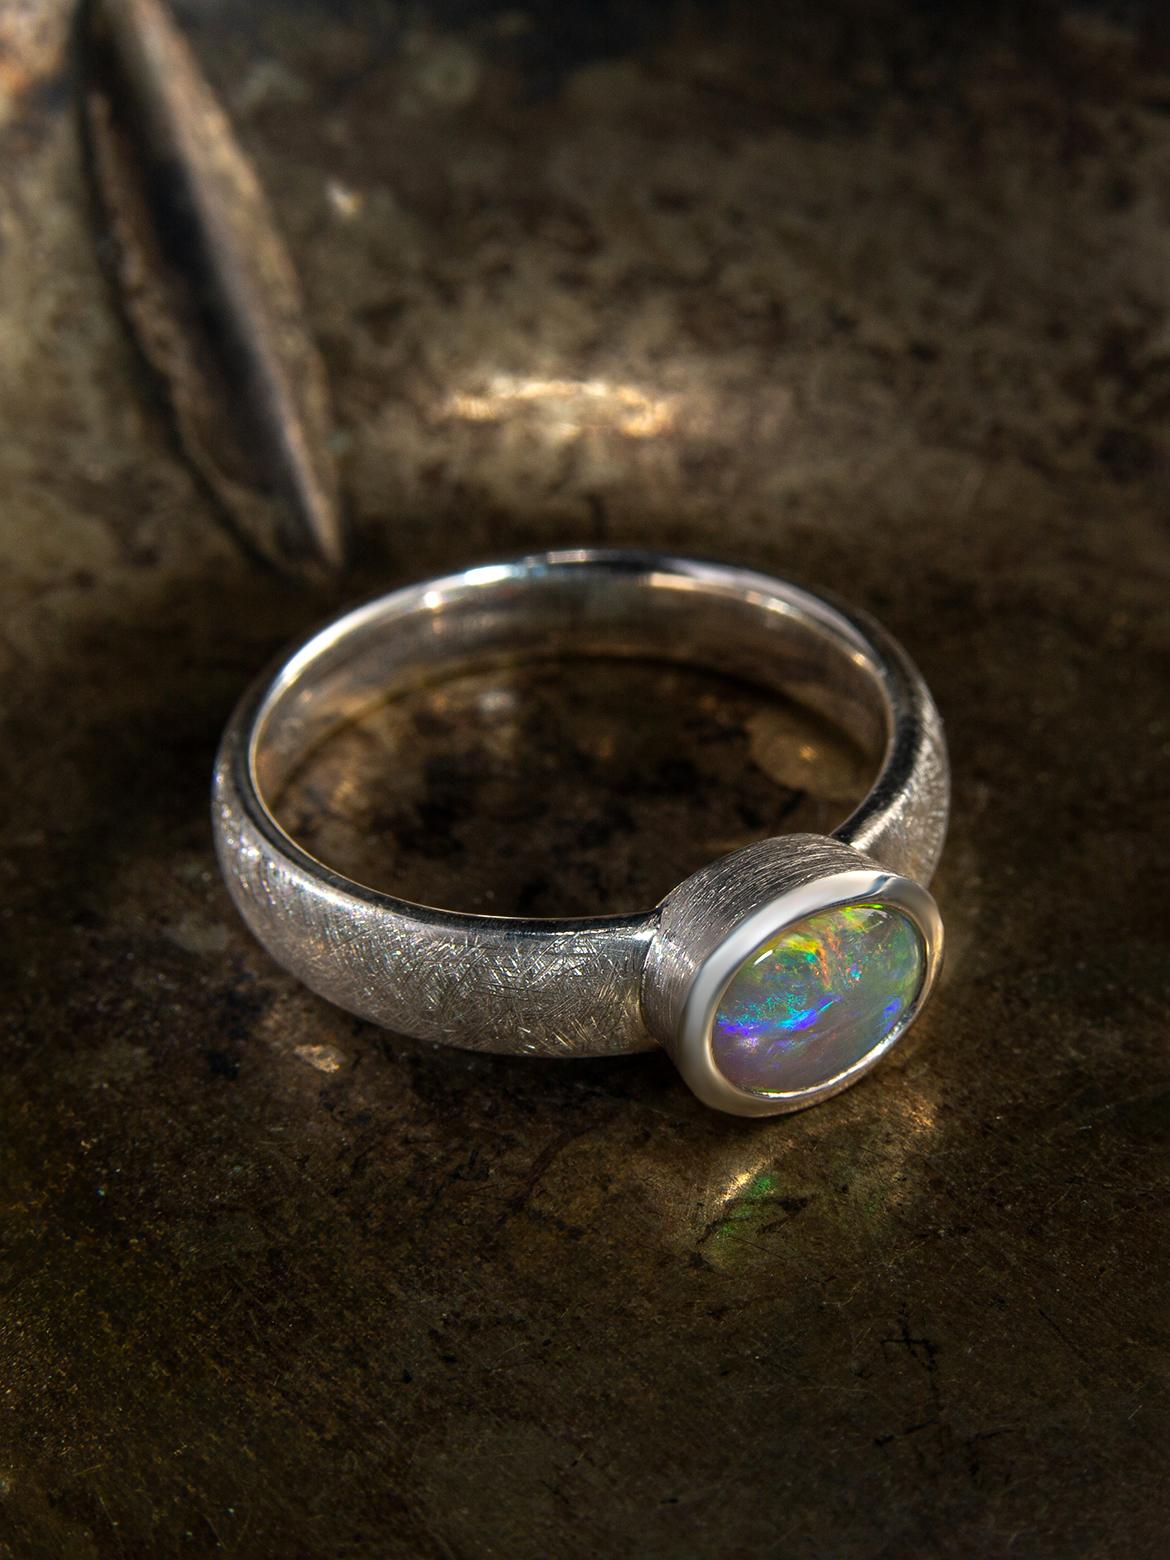 Sterling silver ring with natural Opal
opal origin - Australia
weight of the ring - 5.2 grams
stone measurements: 0.24 x 0.28 in / 6 х 7 mm
ring size - 8.25 US / 58 EU
ref No 2459